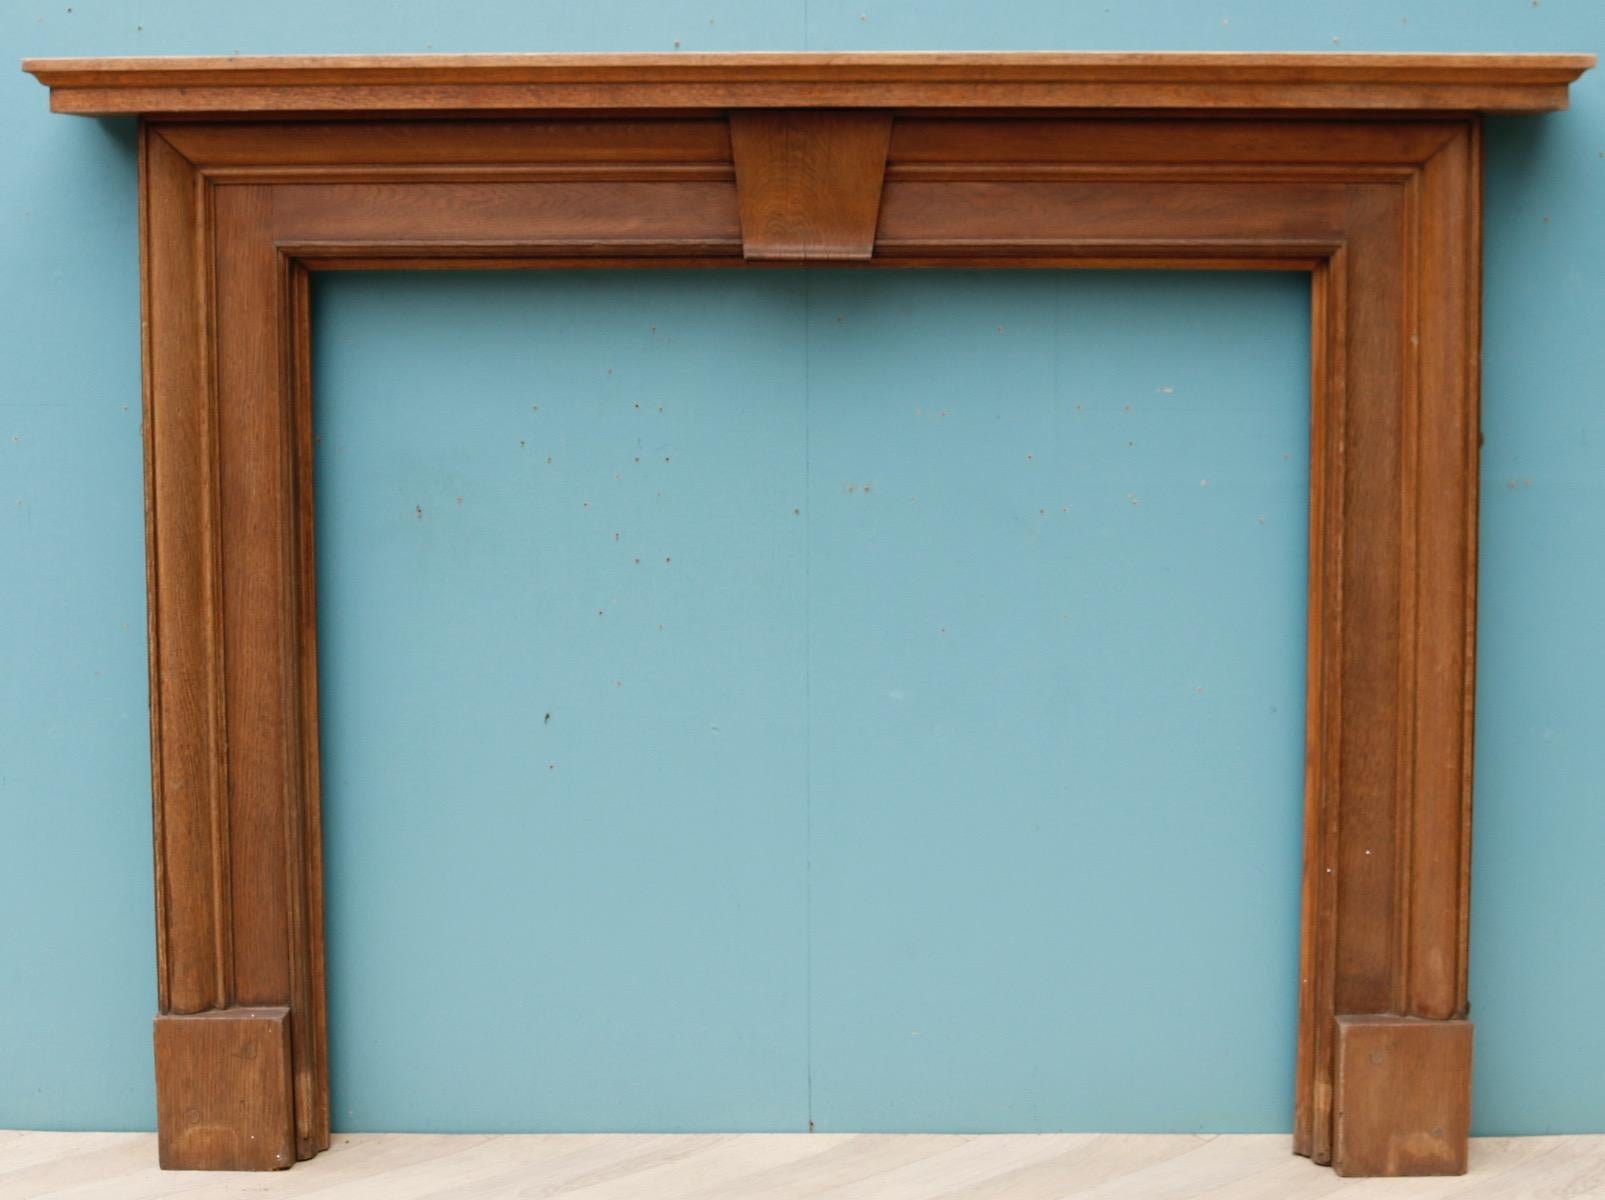 A simple oak fire surround in the Edwardian style.
 
Additional Dimensions
 
Opening Height 91 cm
 
Opening Width 101 cm
 
Width between outsides of the foot blocks 133 cm